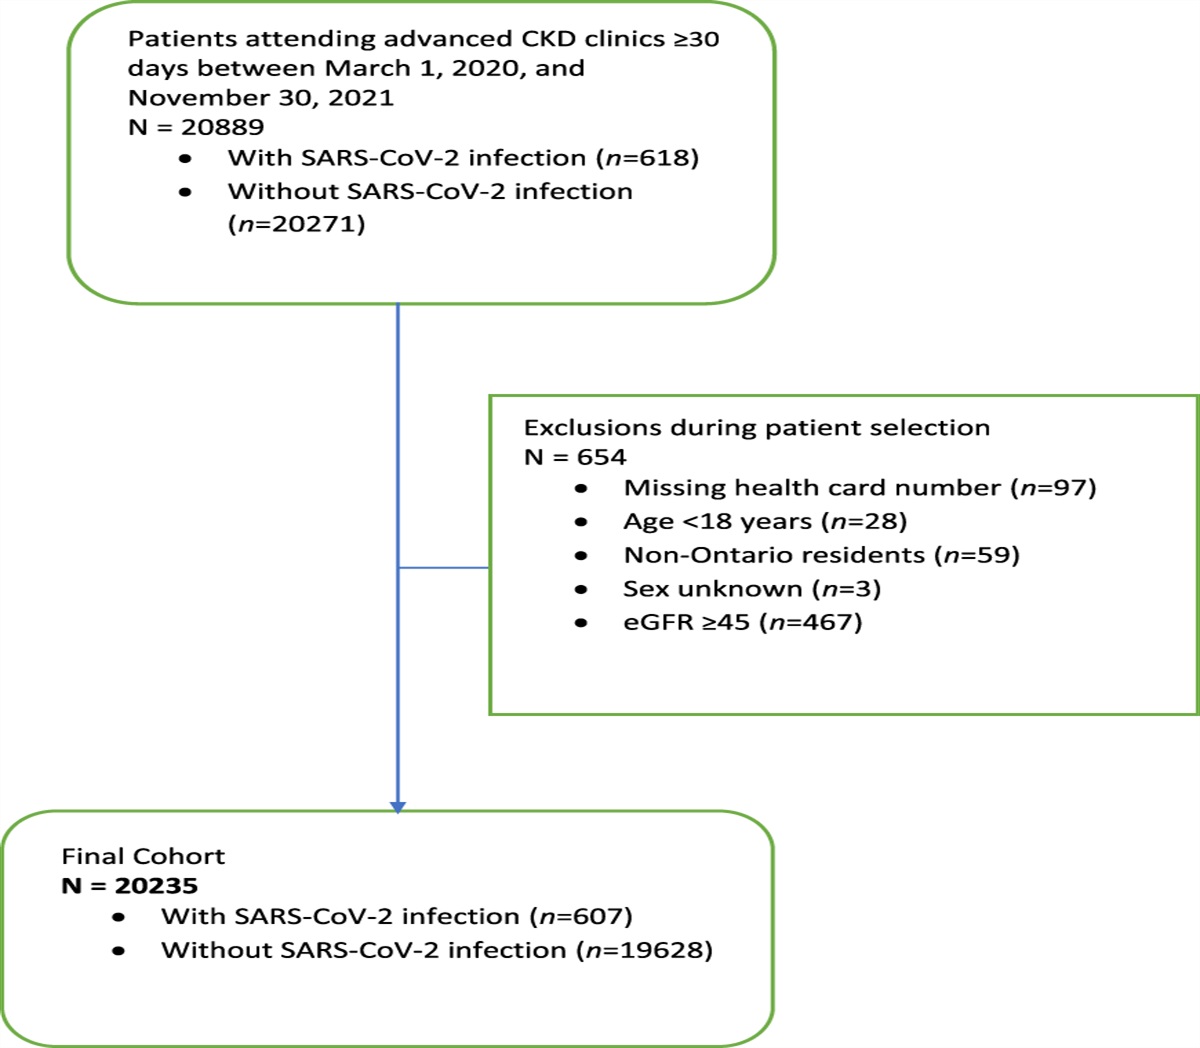 Clinical Outcomes and Vaccine Effectiveness for SARS-CoV-2 Infection in People Attending Advanced CKD Clinics: A Retrospective Provincial Cohort Study